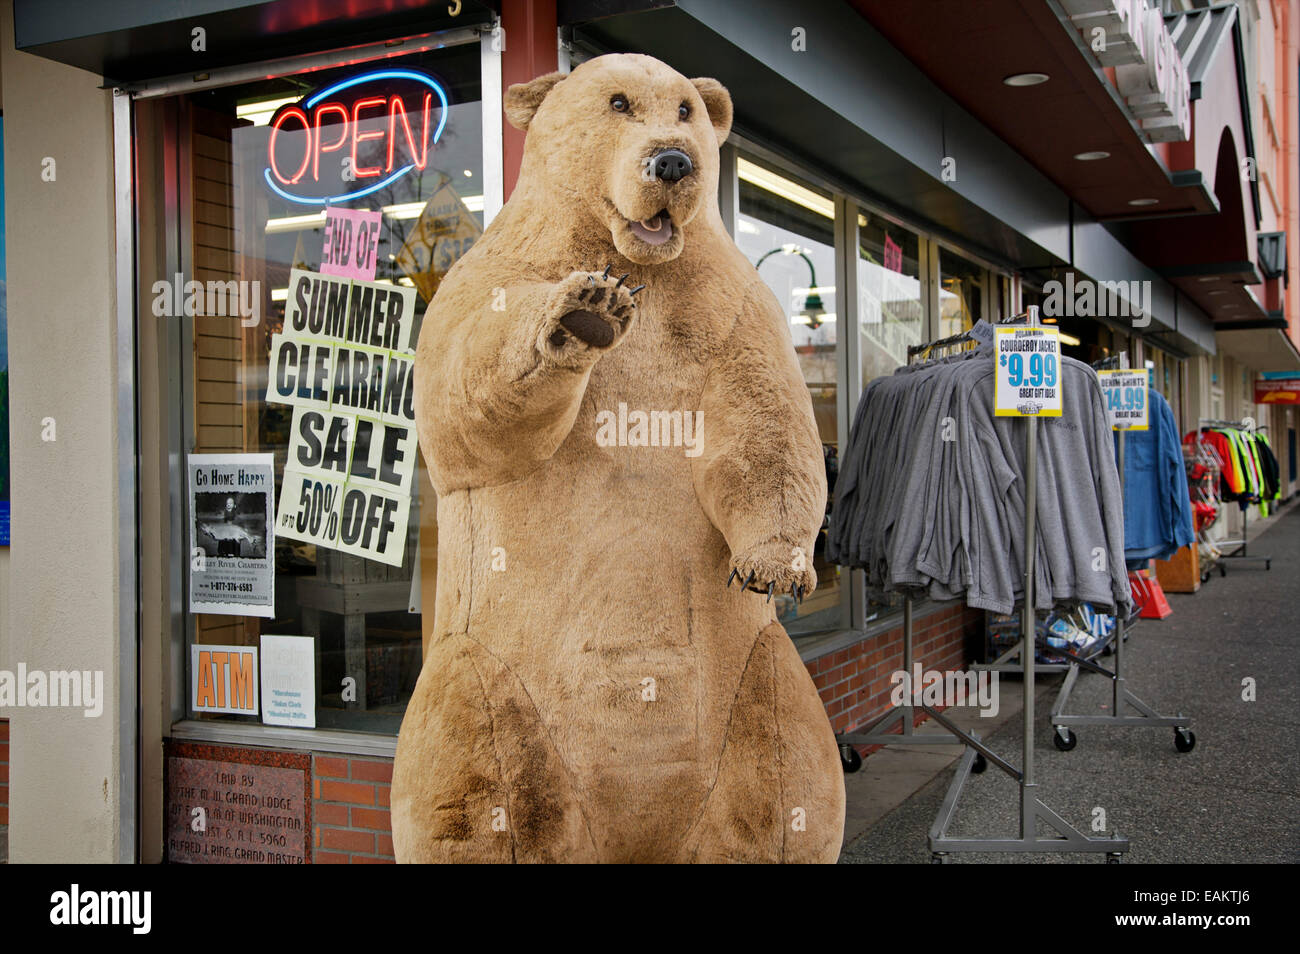 Retail Business Along An Anchorage Street Displays A Large, Fake Stuffed Bear Stock Photo